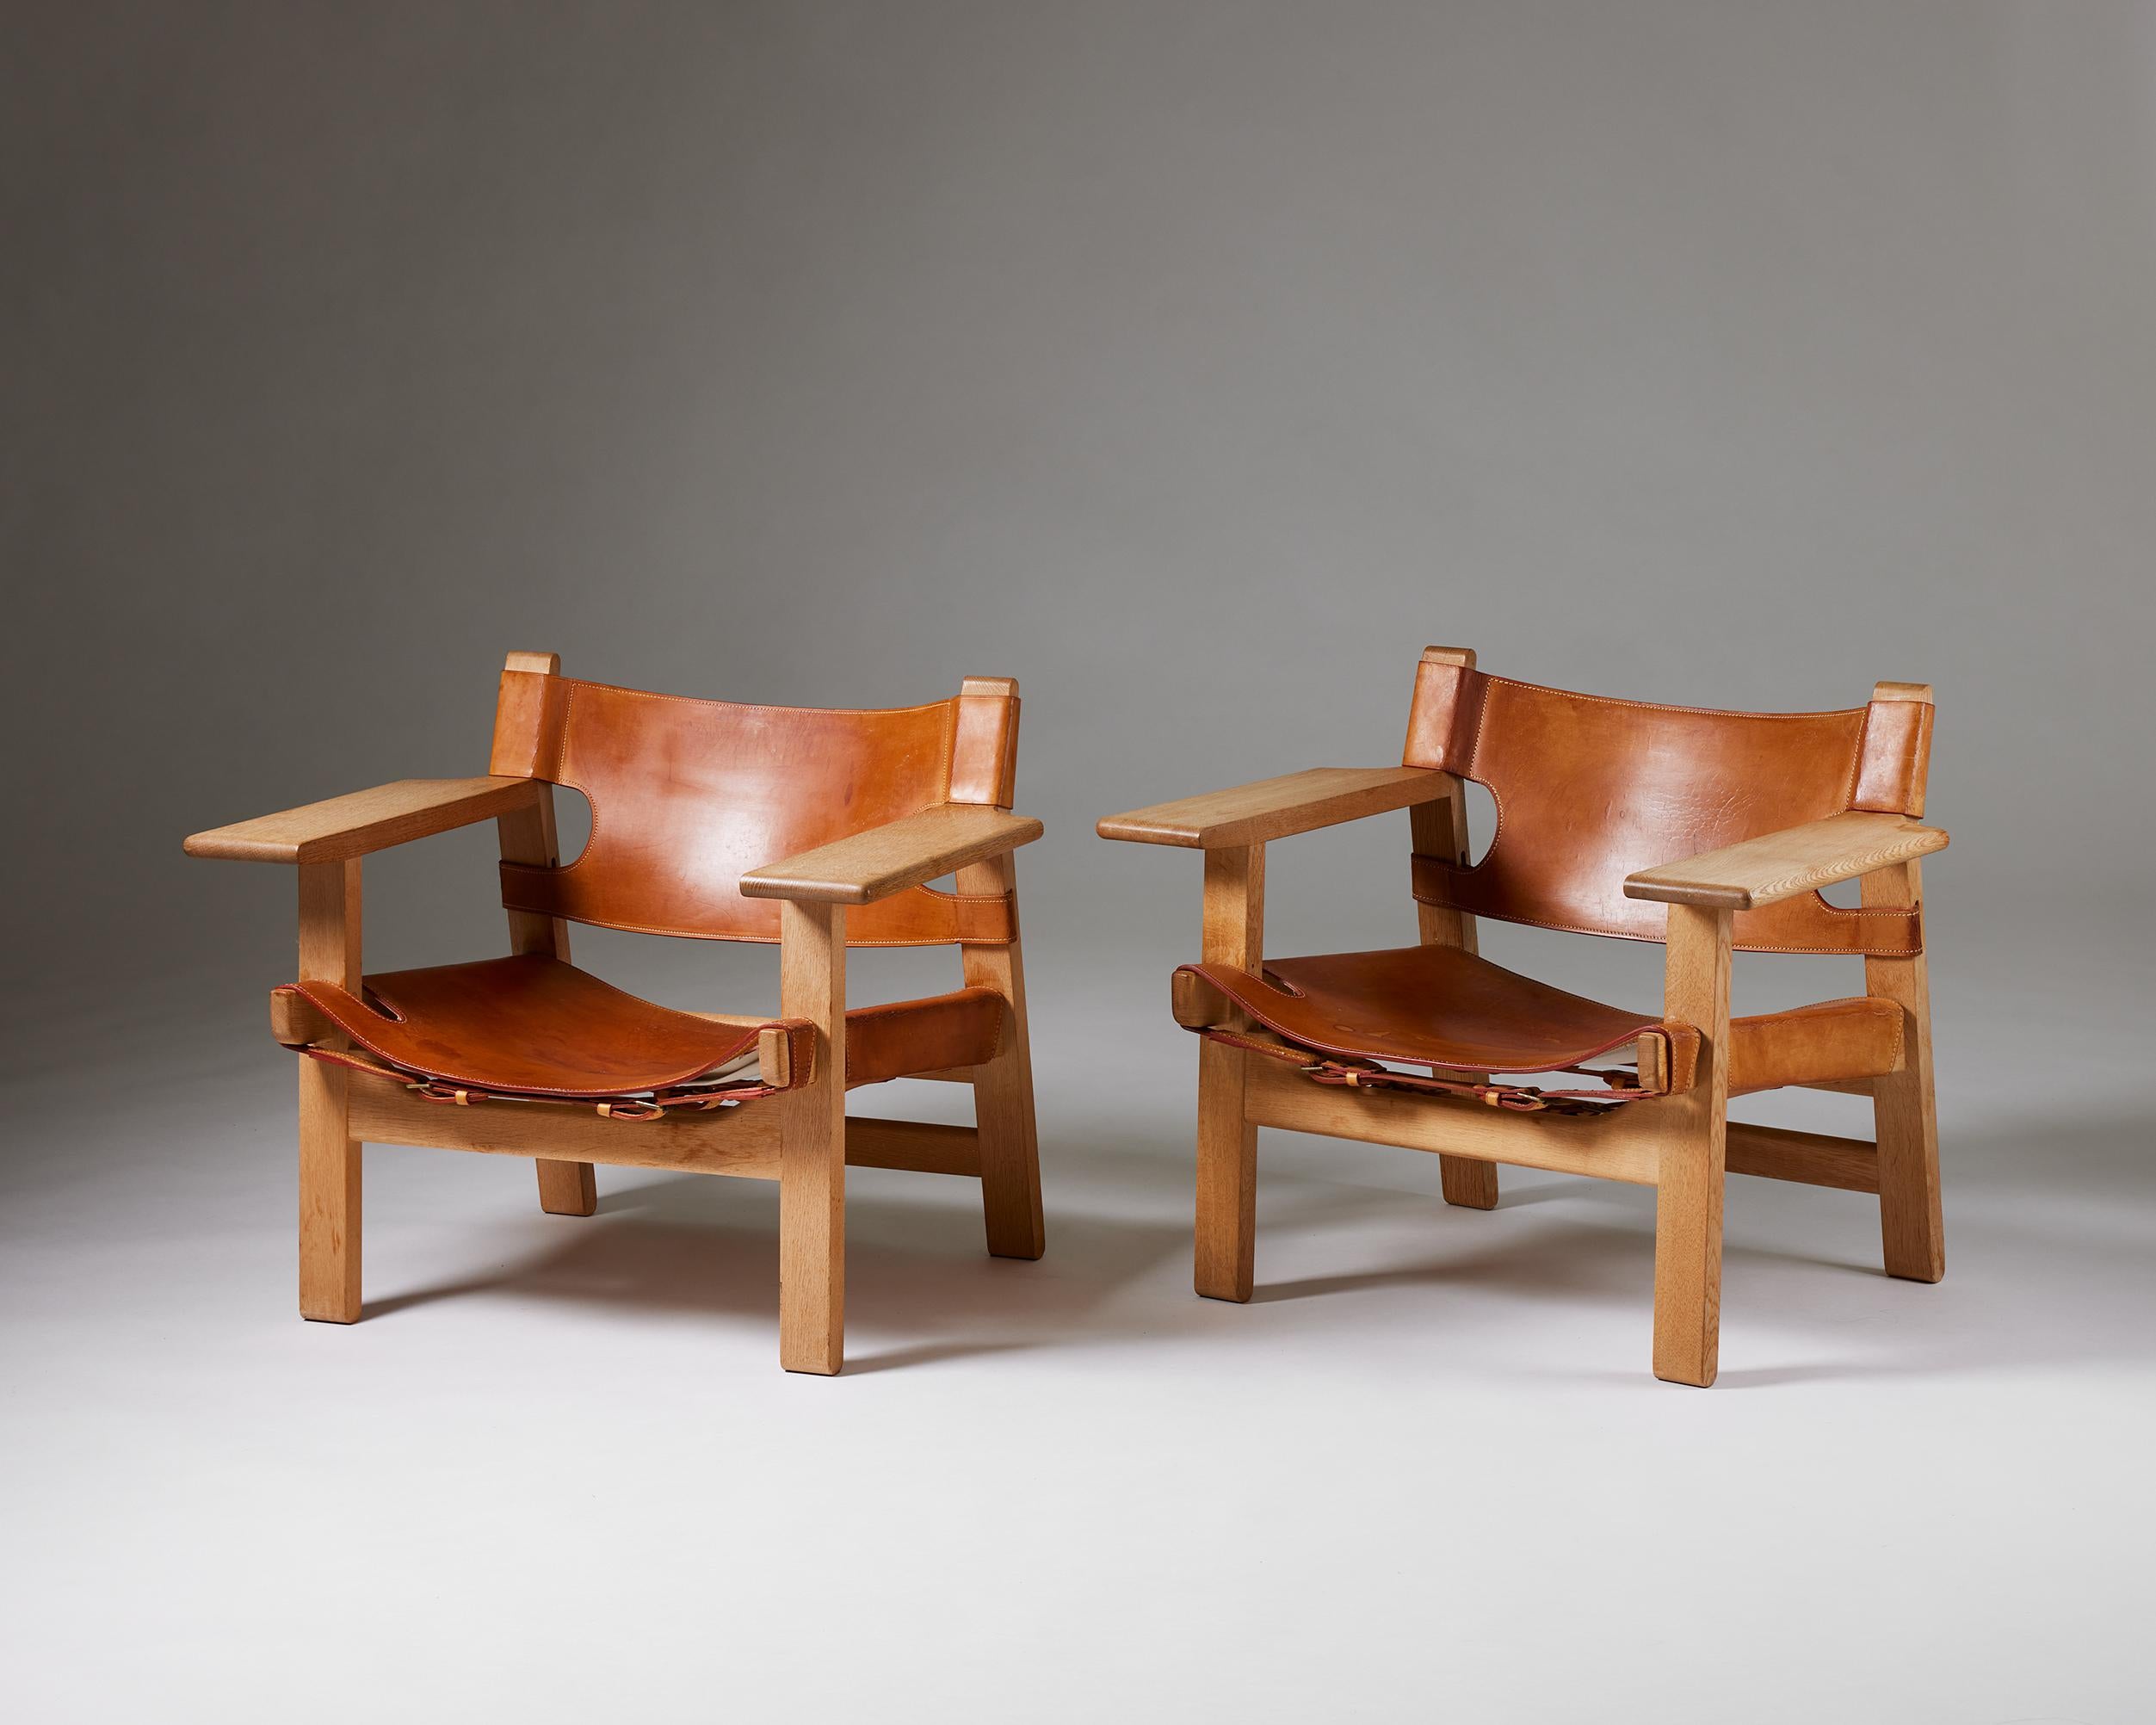 Pair of armchairs ‘The Spanish Chair’ model 2226 designed by Börge Mogensen for Fredericia Stolefabrik
Denmark, 1958.
Oak and cognac leather.

The robust construction, simple lines, and natural materials of Börge Mogensen’s “Spanish Chair” make it